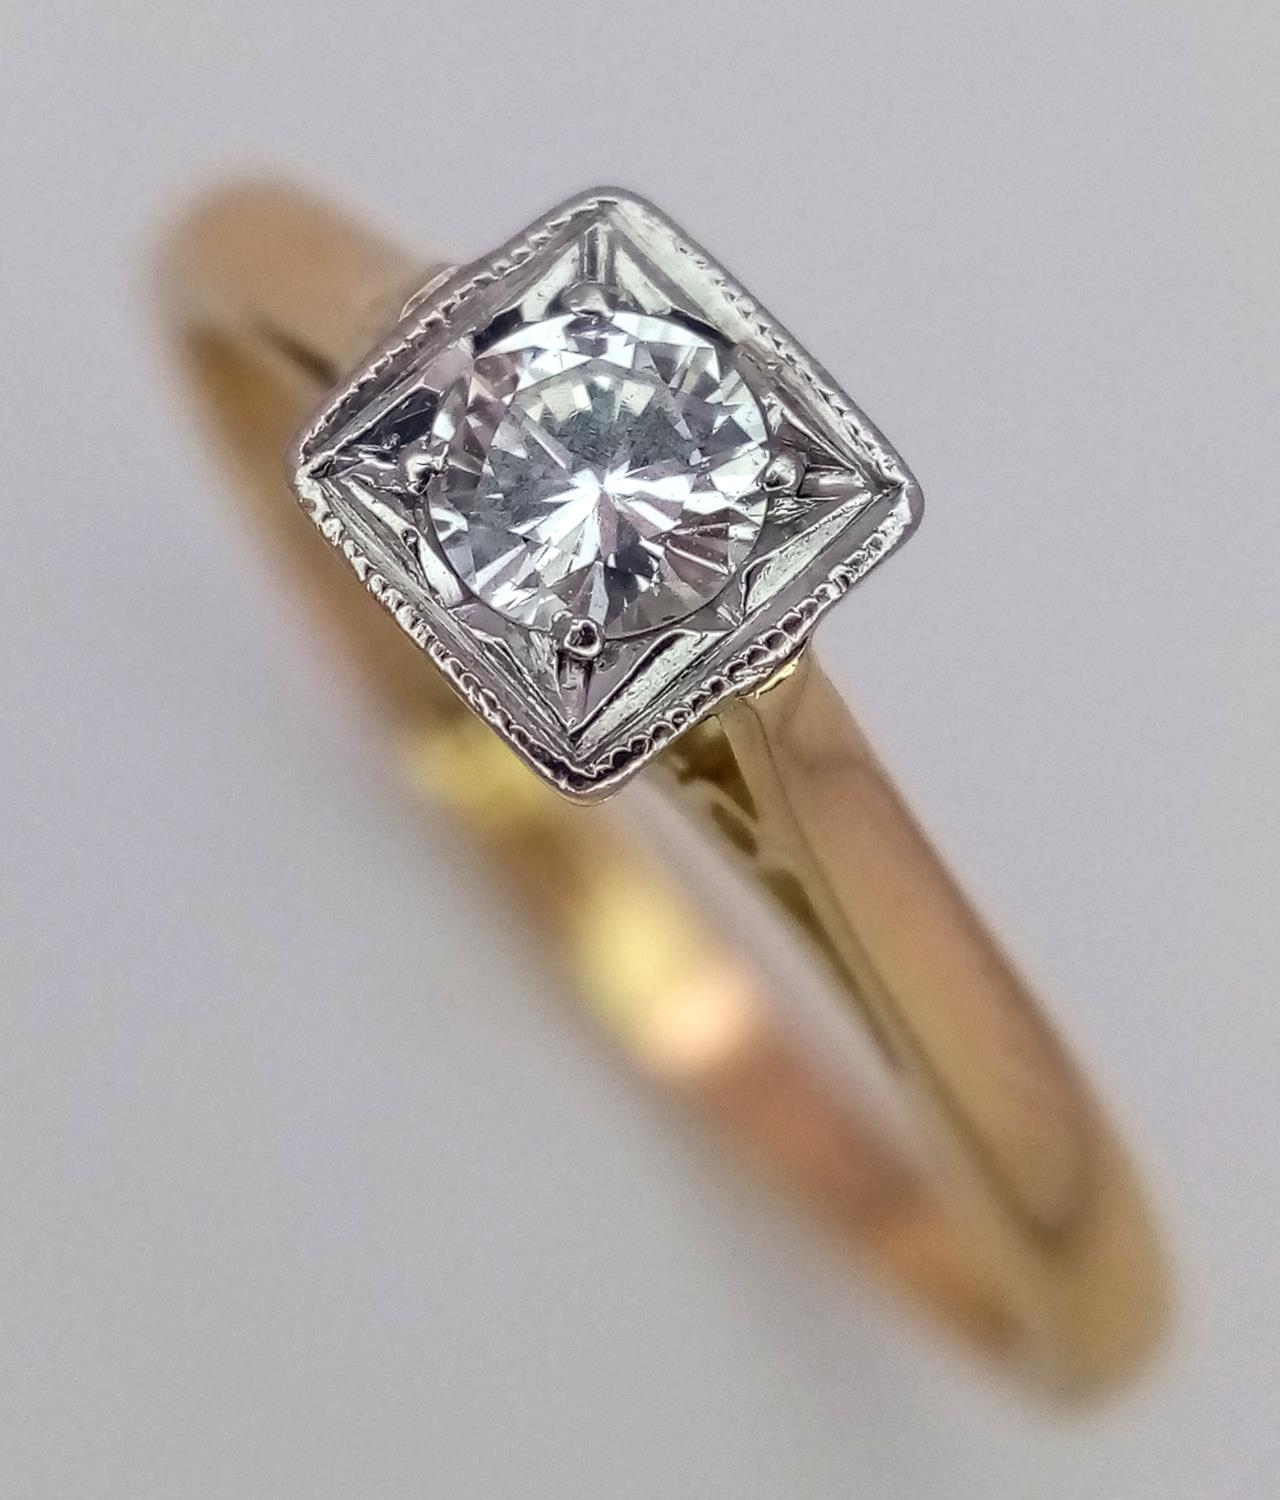 A 18K YELLOW GOLD & PLATINUM DIAMOND SOLITAIRE RING 0.15CT 2.6G SIZE M/N SPAS 9001 - Image 3 of 5